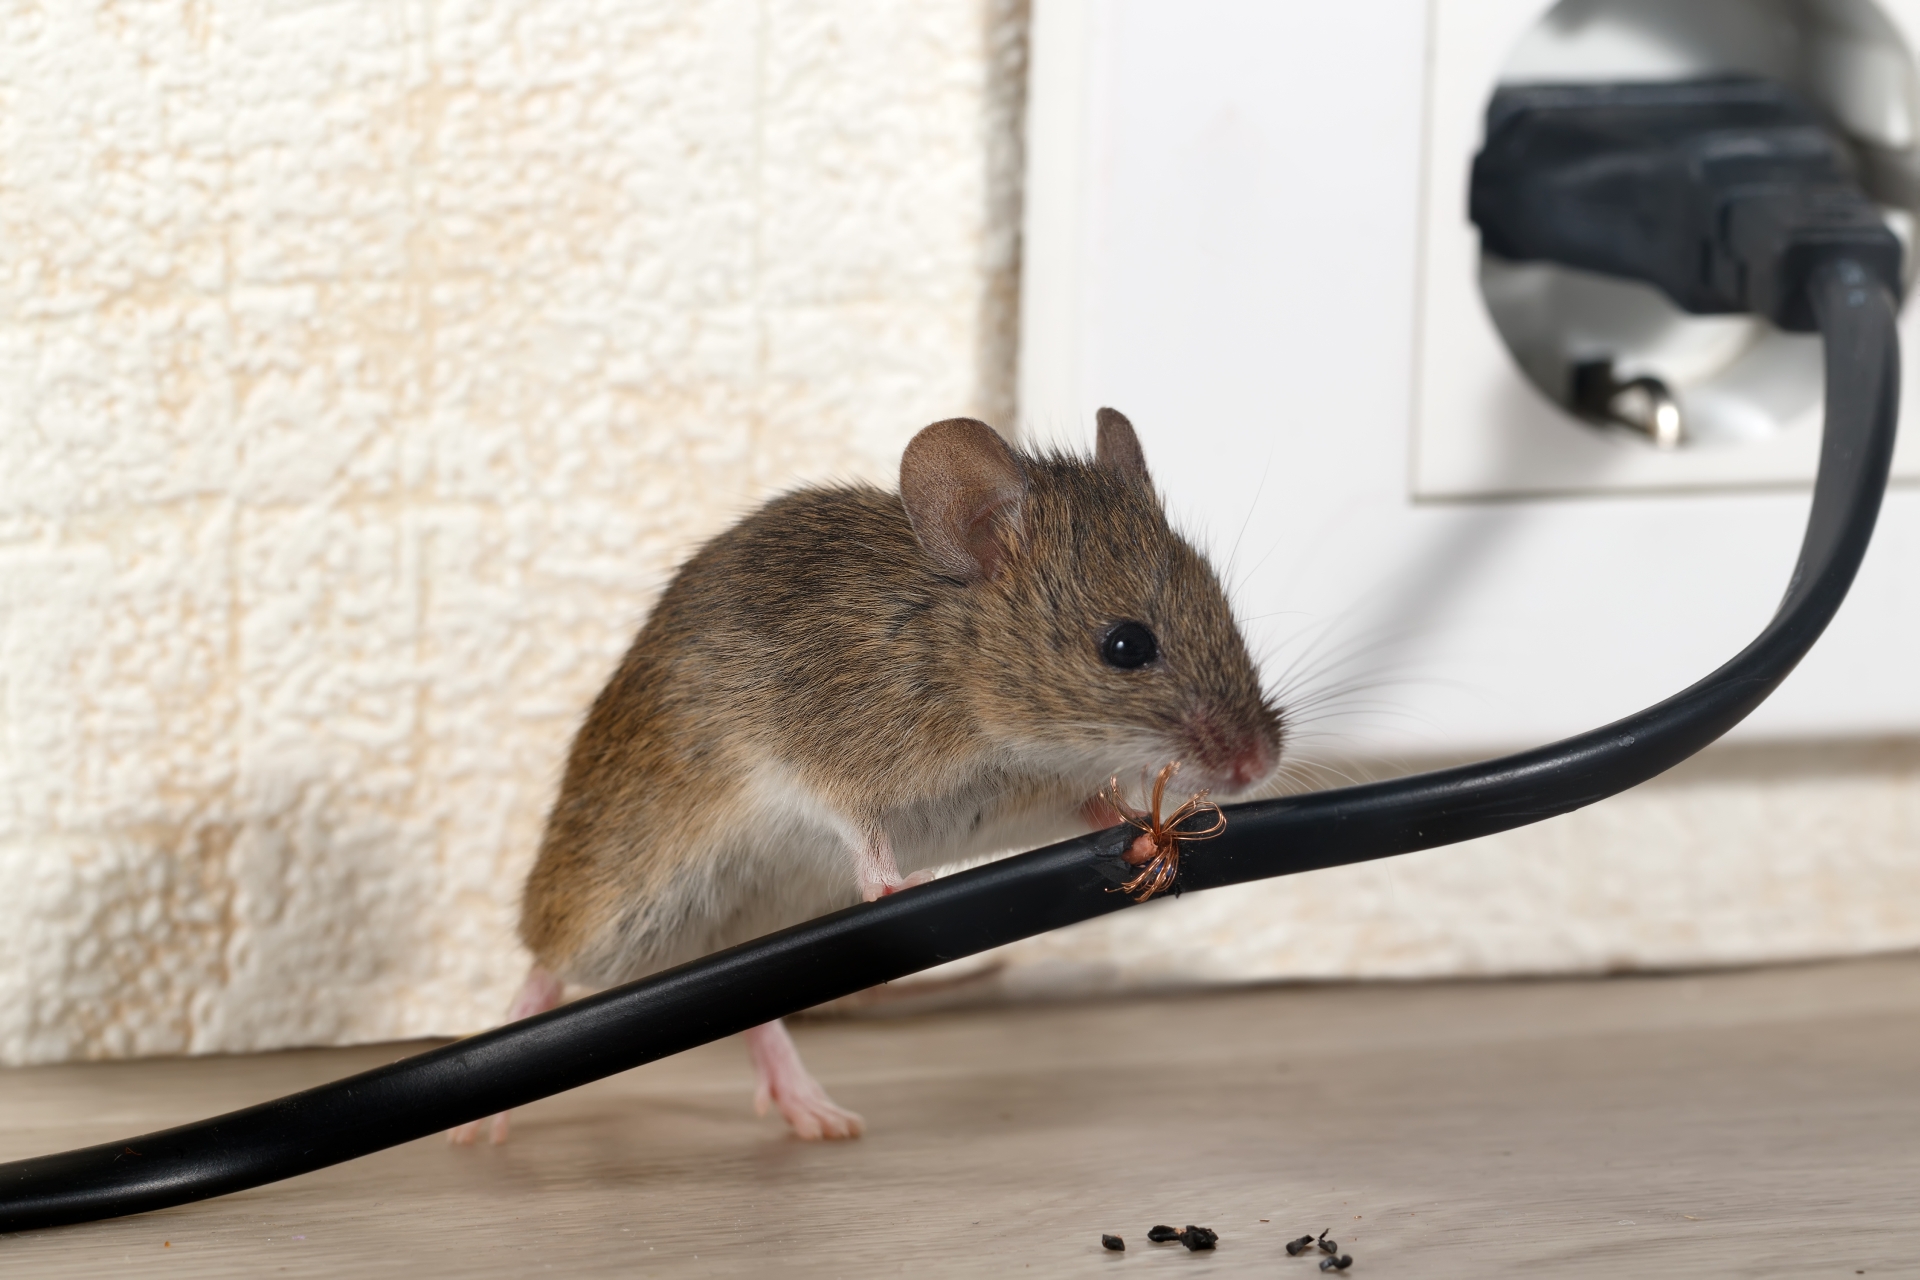 Mice Infestation, Pest Control in Camberwell, SE5. Call Now 020 8166 9746